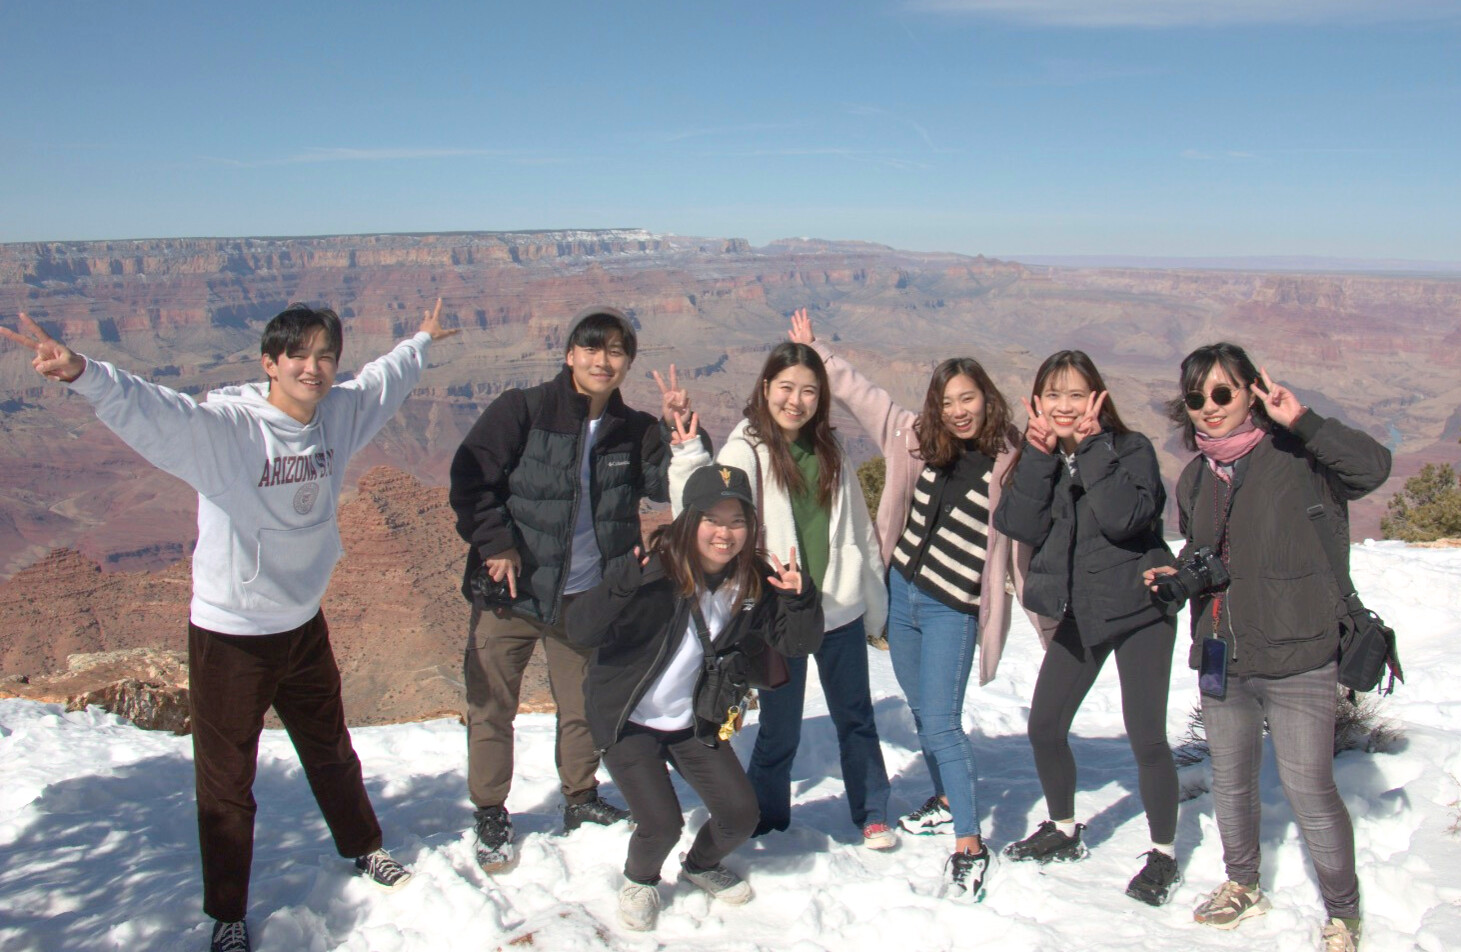 Students posing, giving peace signs in snow at Grand Canyon.